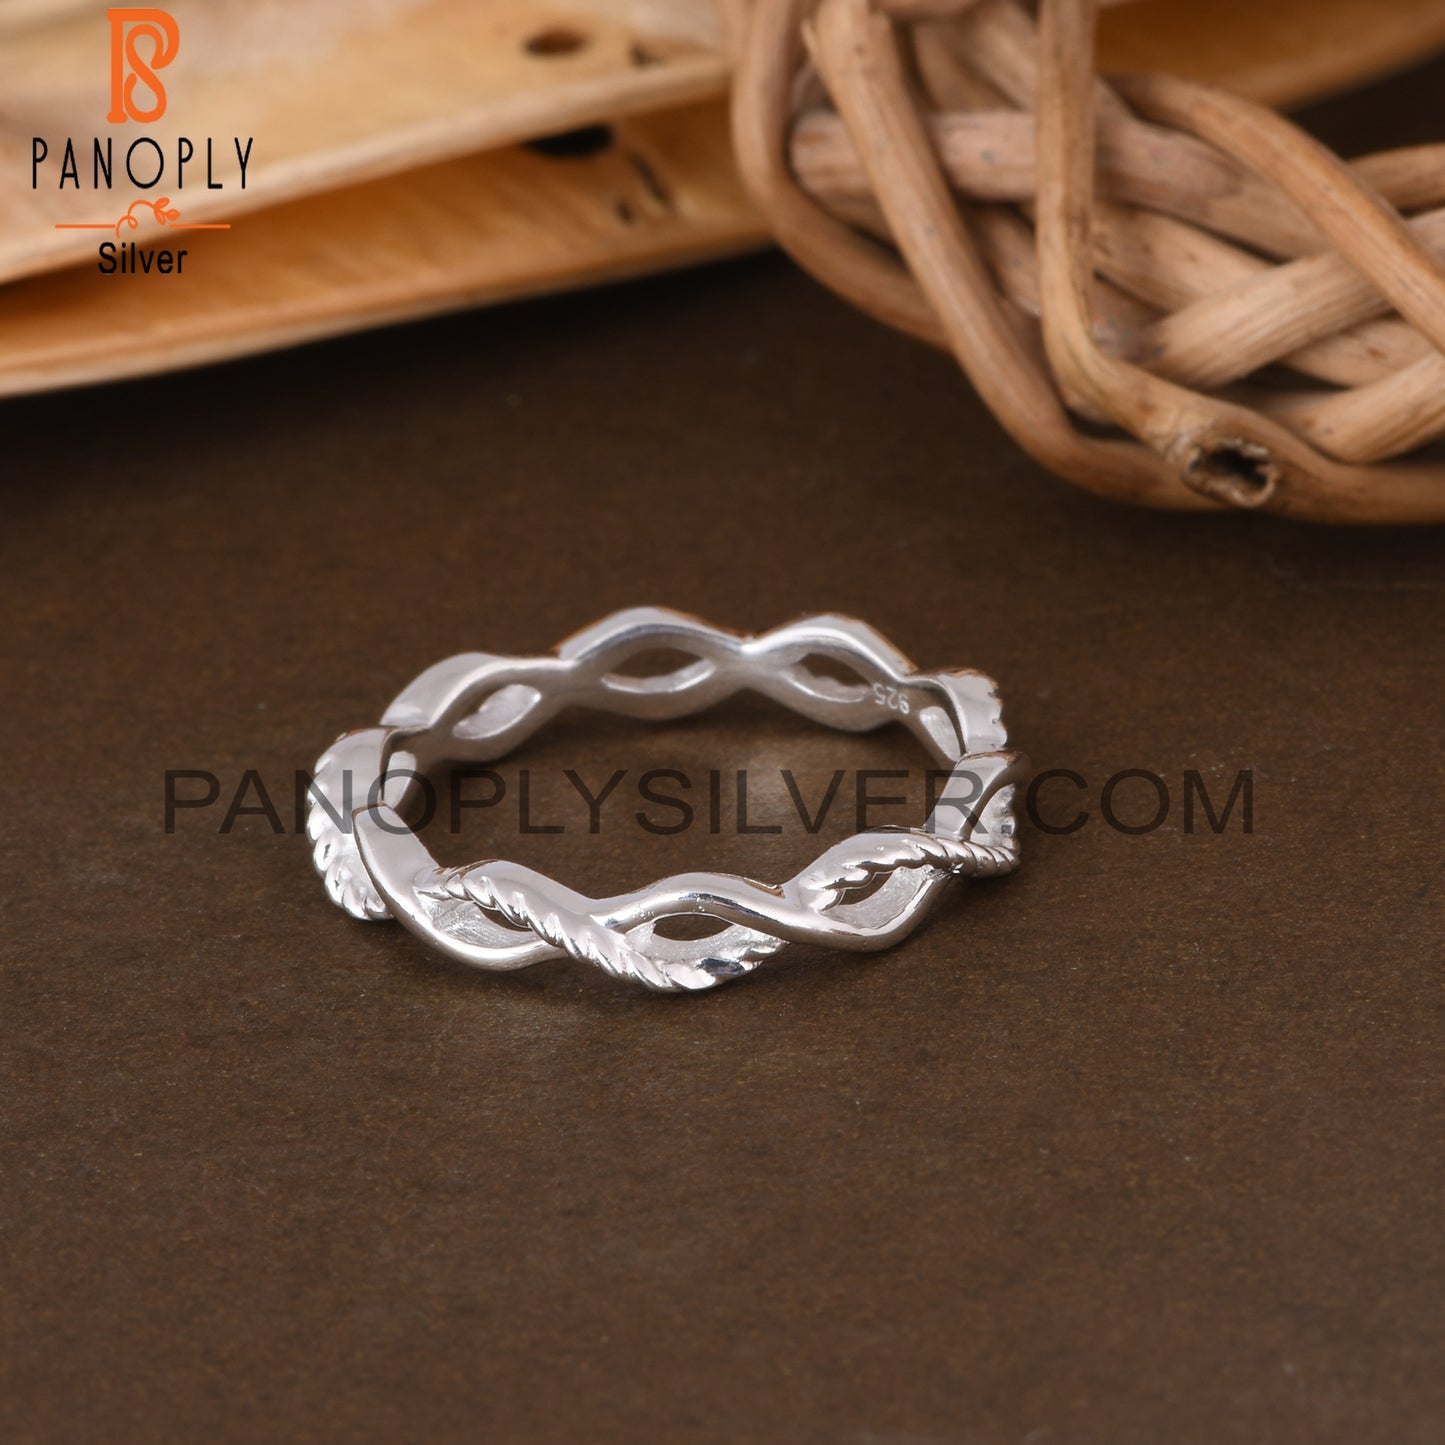 Handmade 925 Sterling Silver Twisted Ring Band